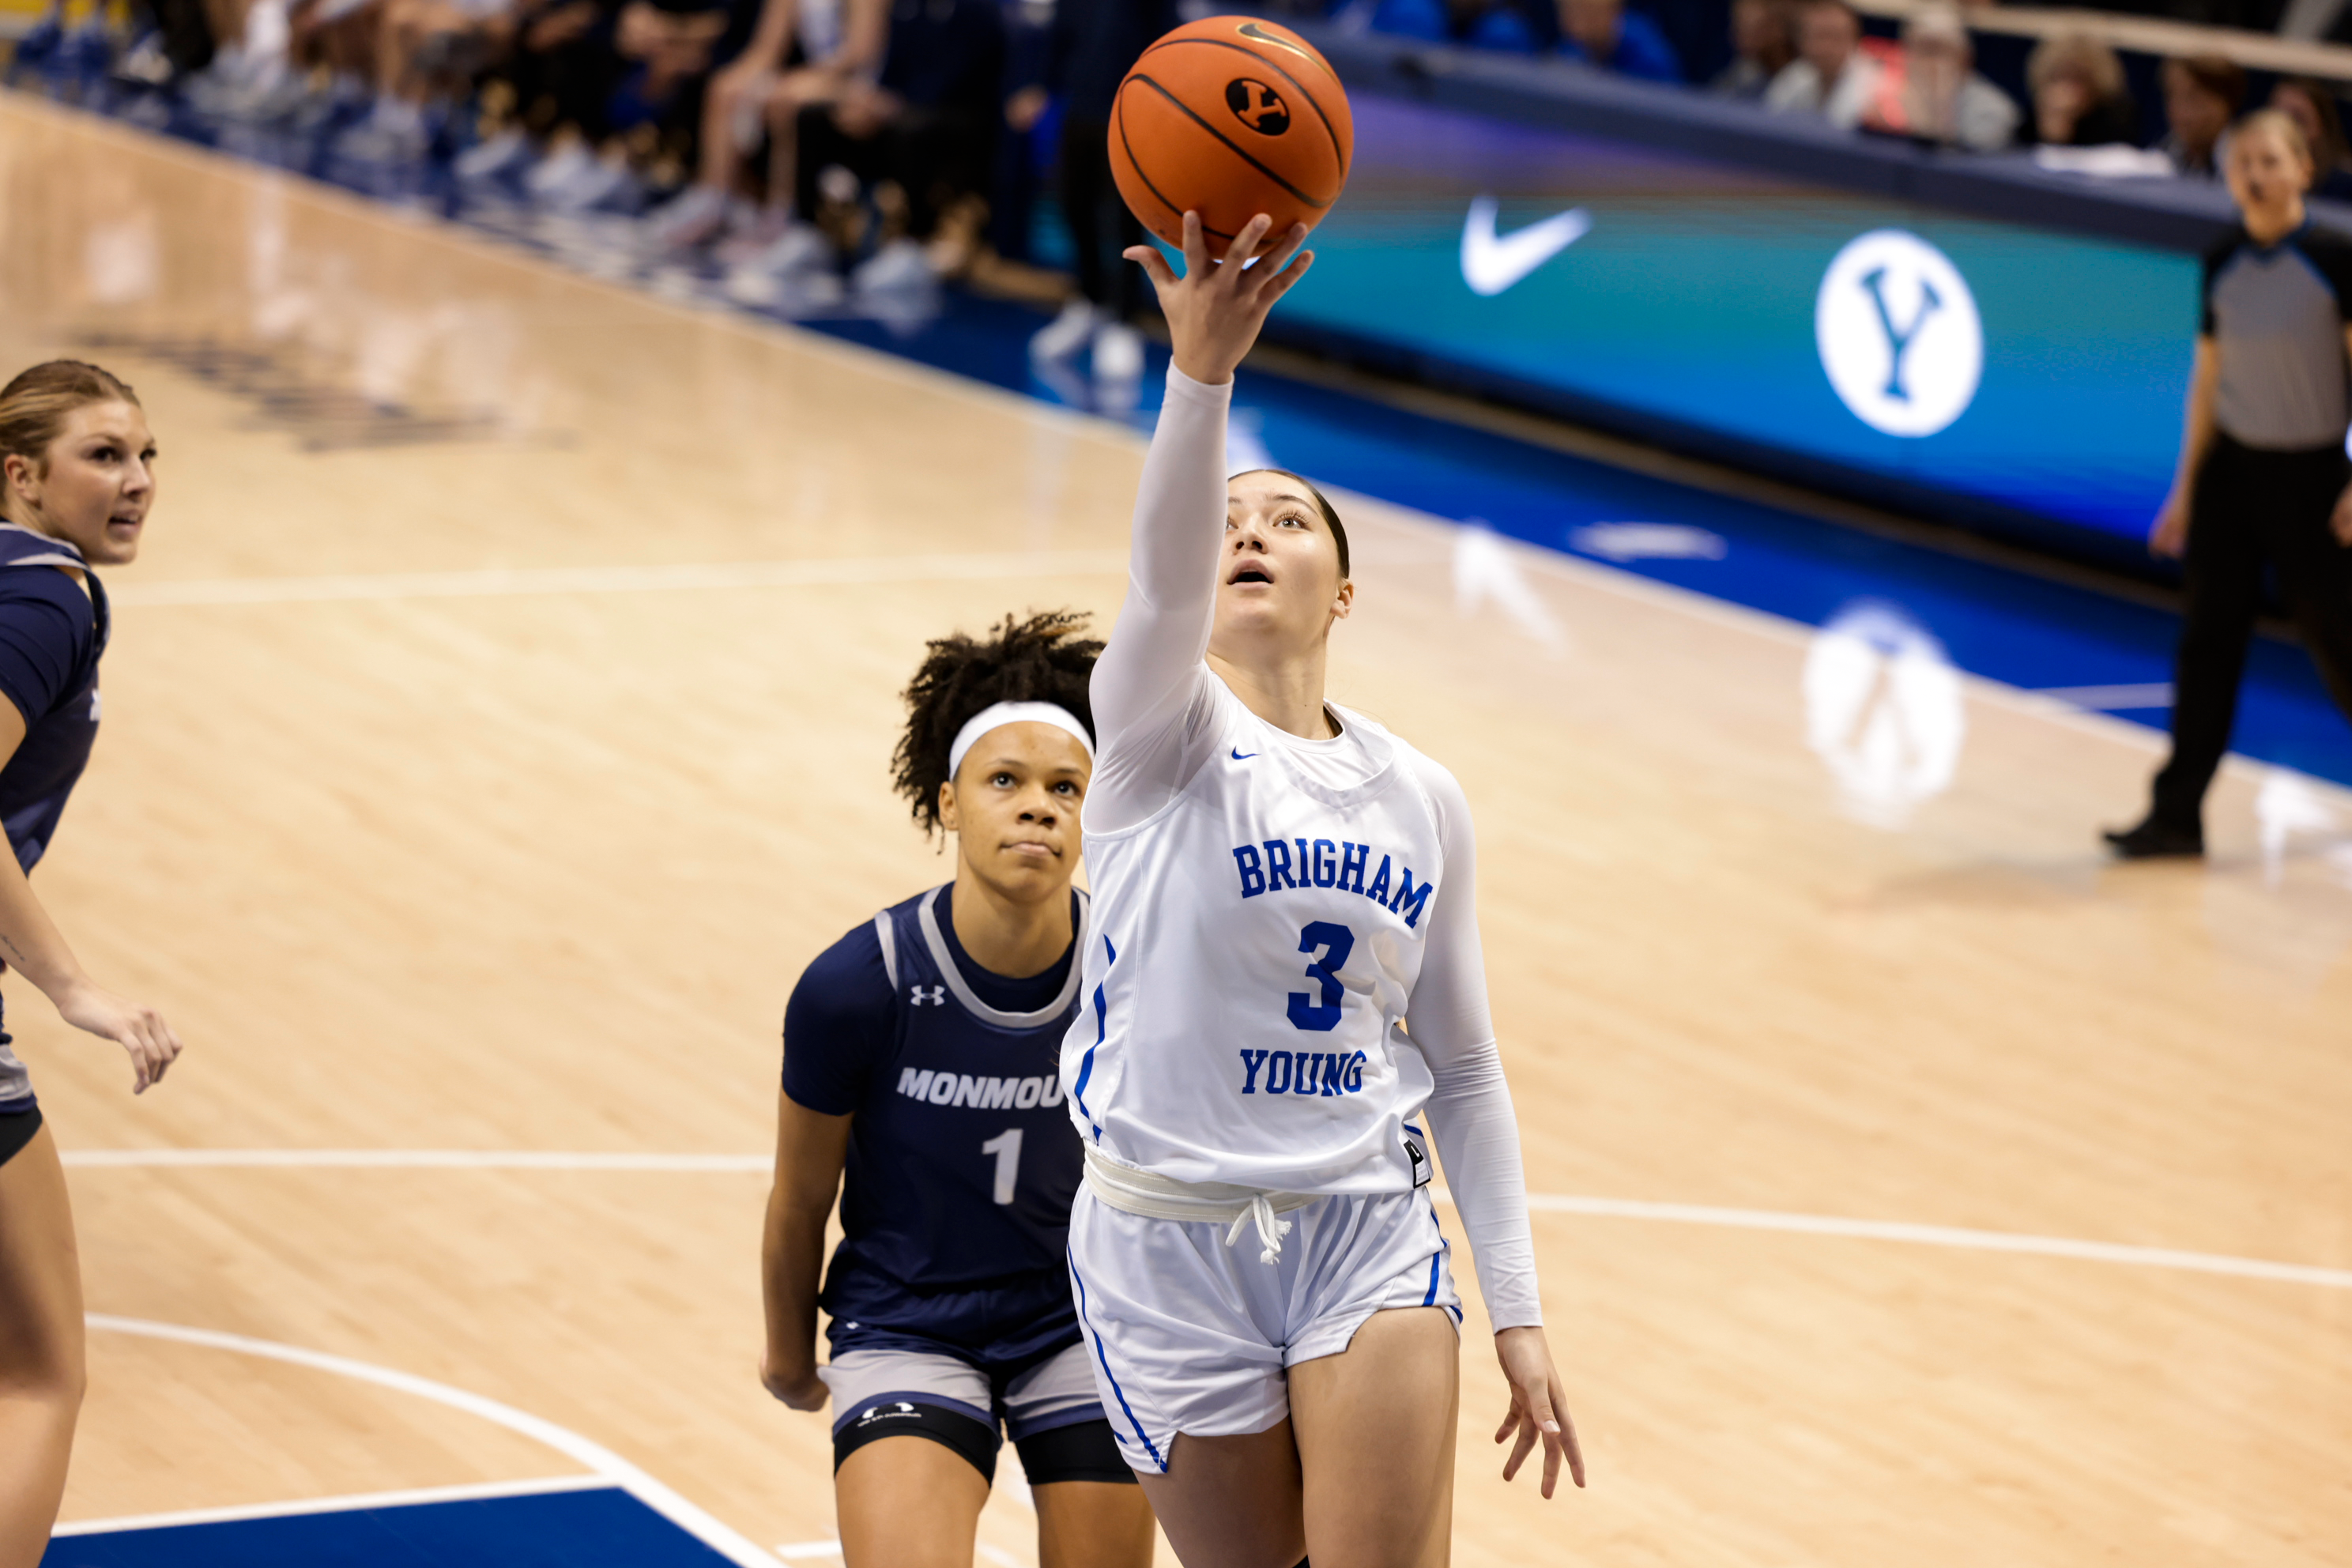 Nani Falatea scoops and scores during a 70-50 win over Monmouth at the Marriott Center.